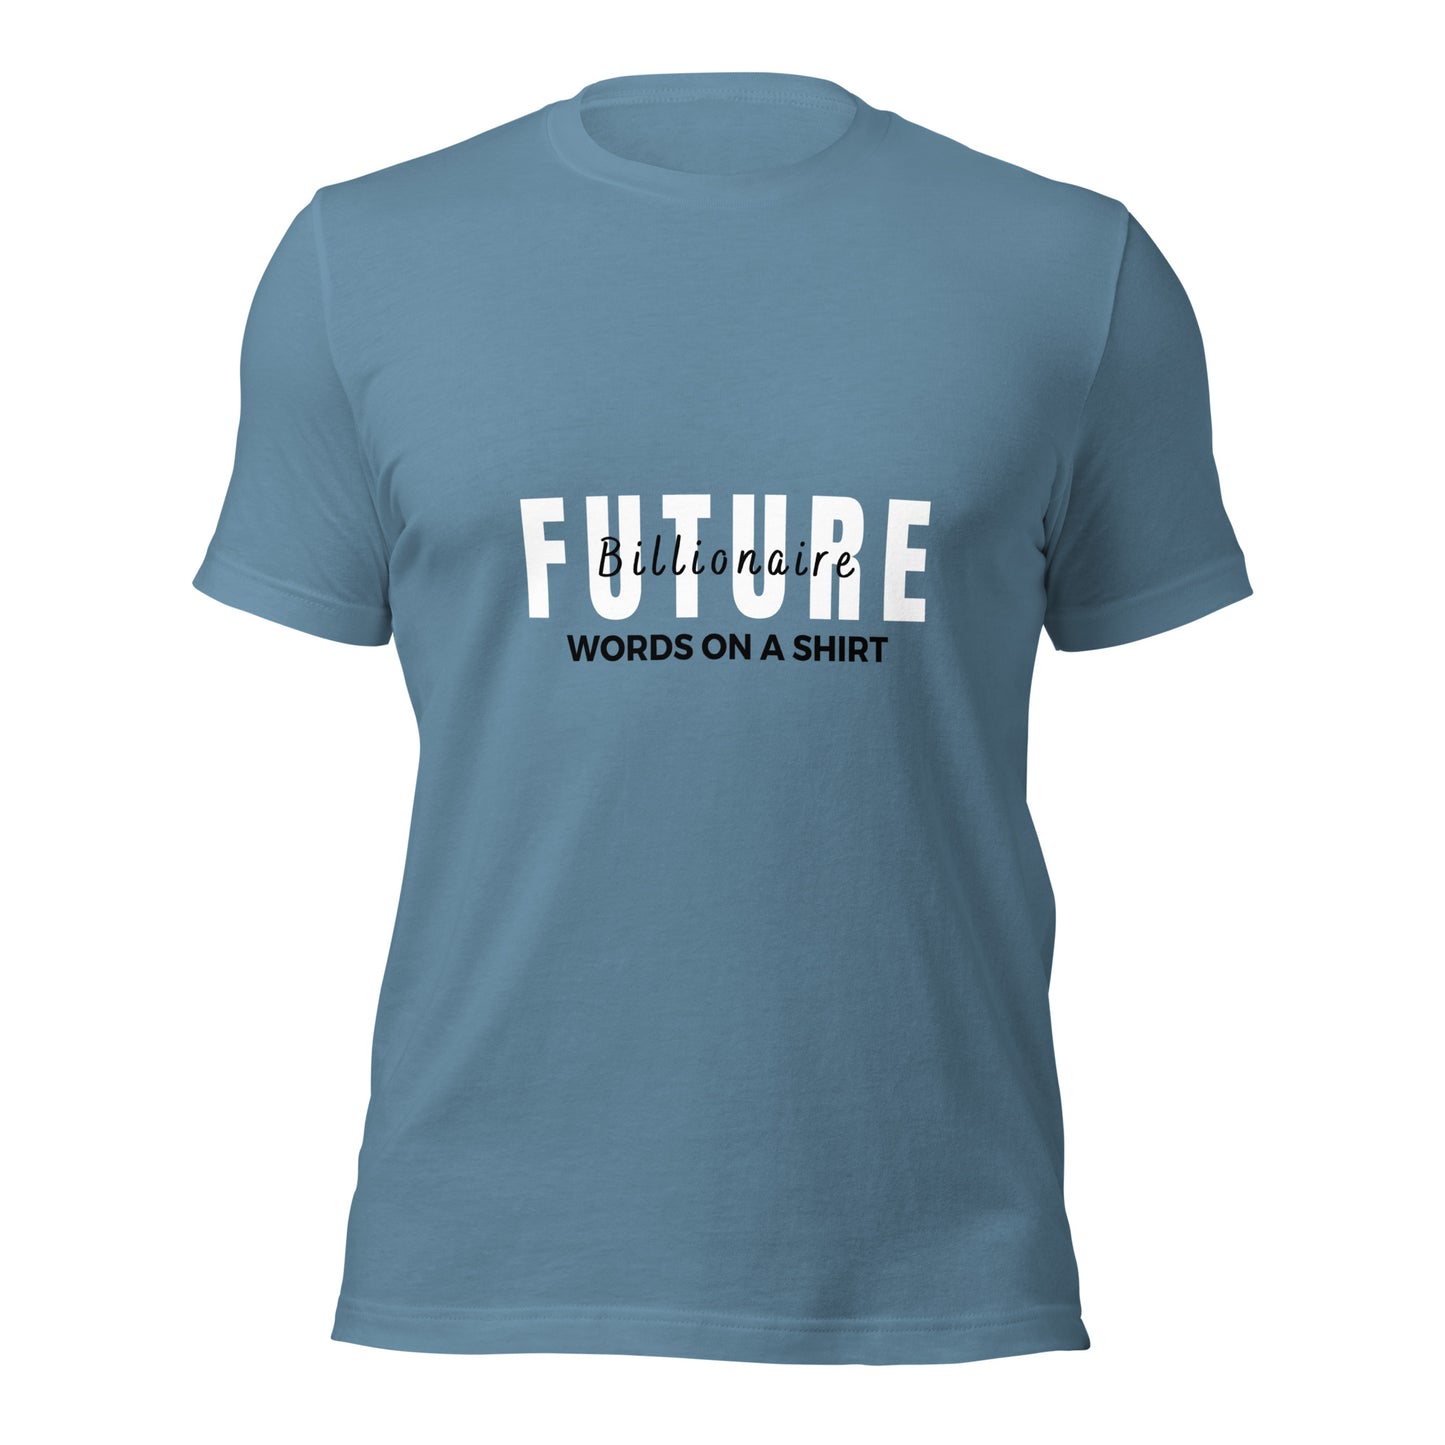 Get ready to conquer the world in style with our Future Billionaire unisex t-shirt. Made from soft, lightweight, and stretchy material, it's perfect for anyone who's destined for greatness. Don't miss out on this must-have shirt for all you future billionaires out there!